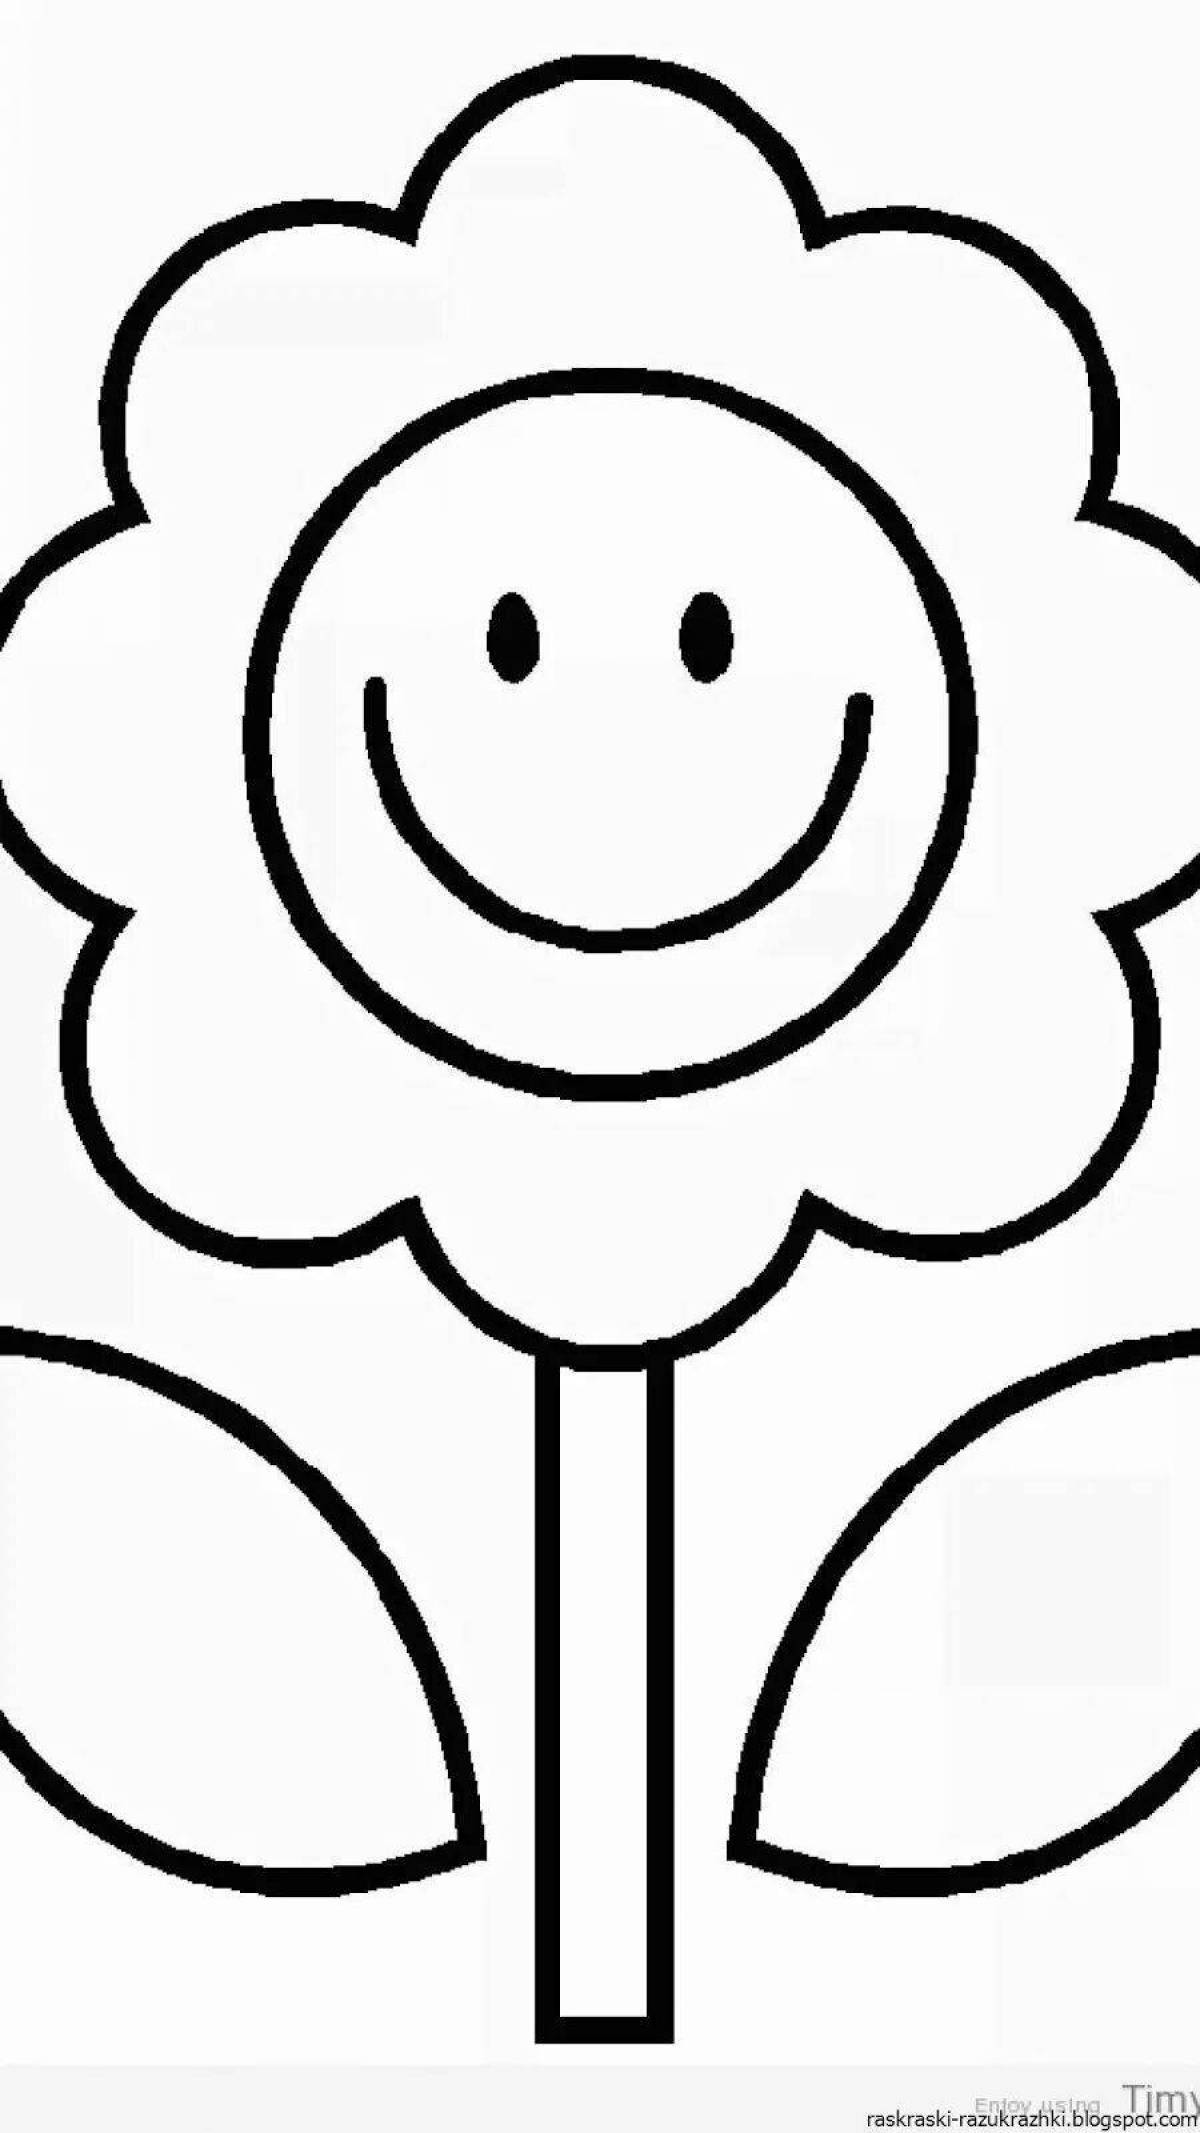 Delightful simple flower coloring book